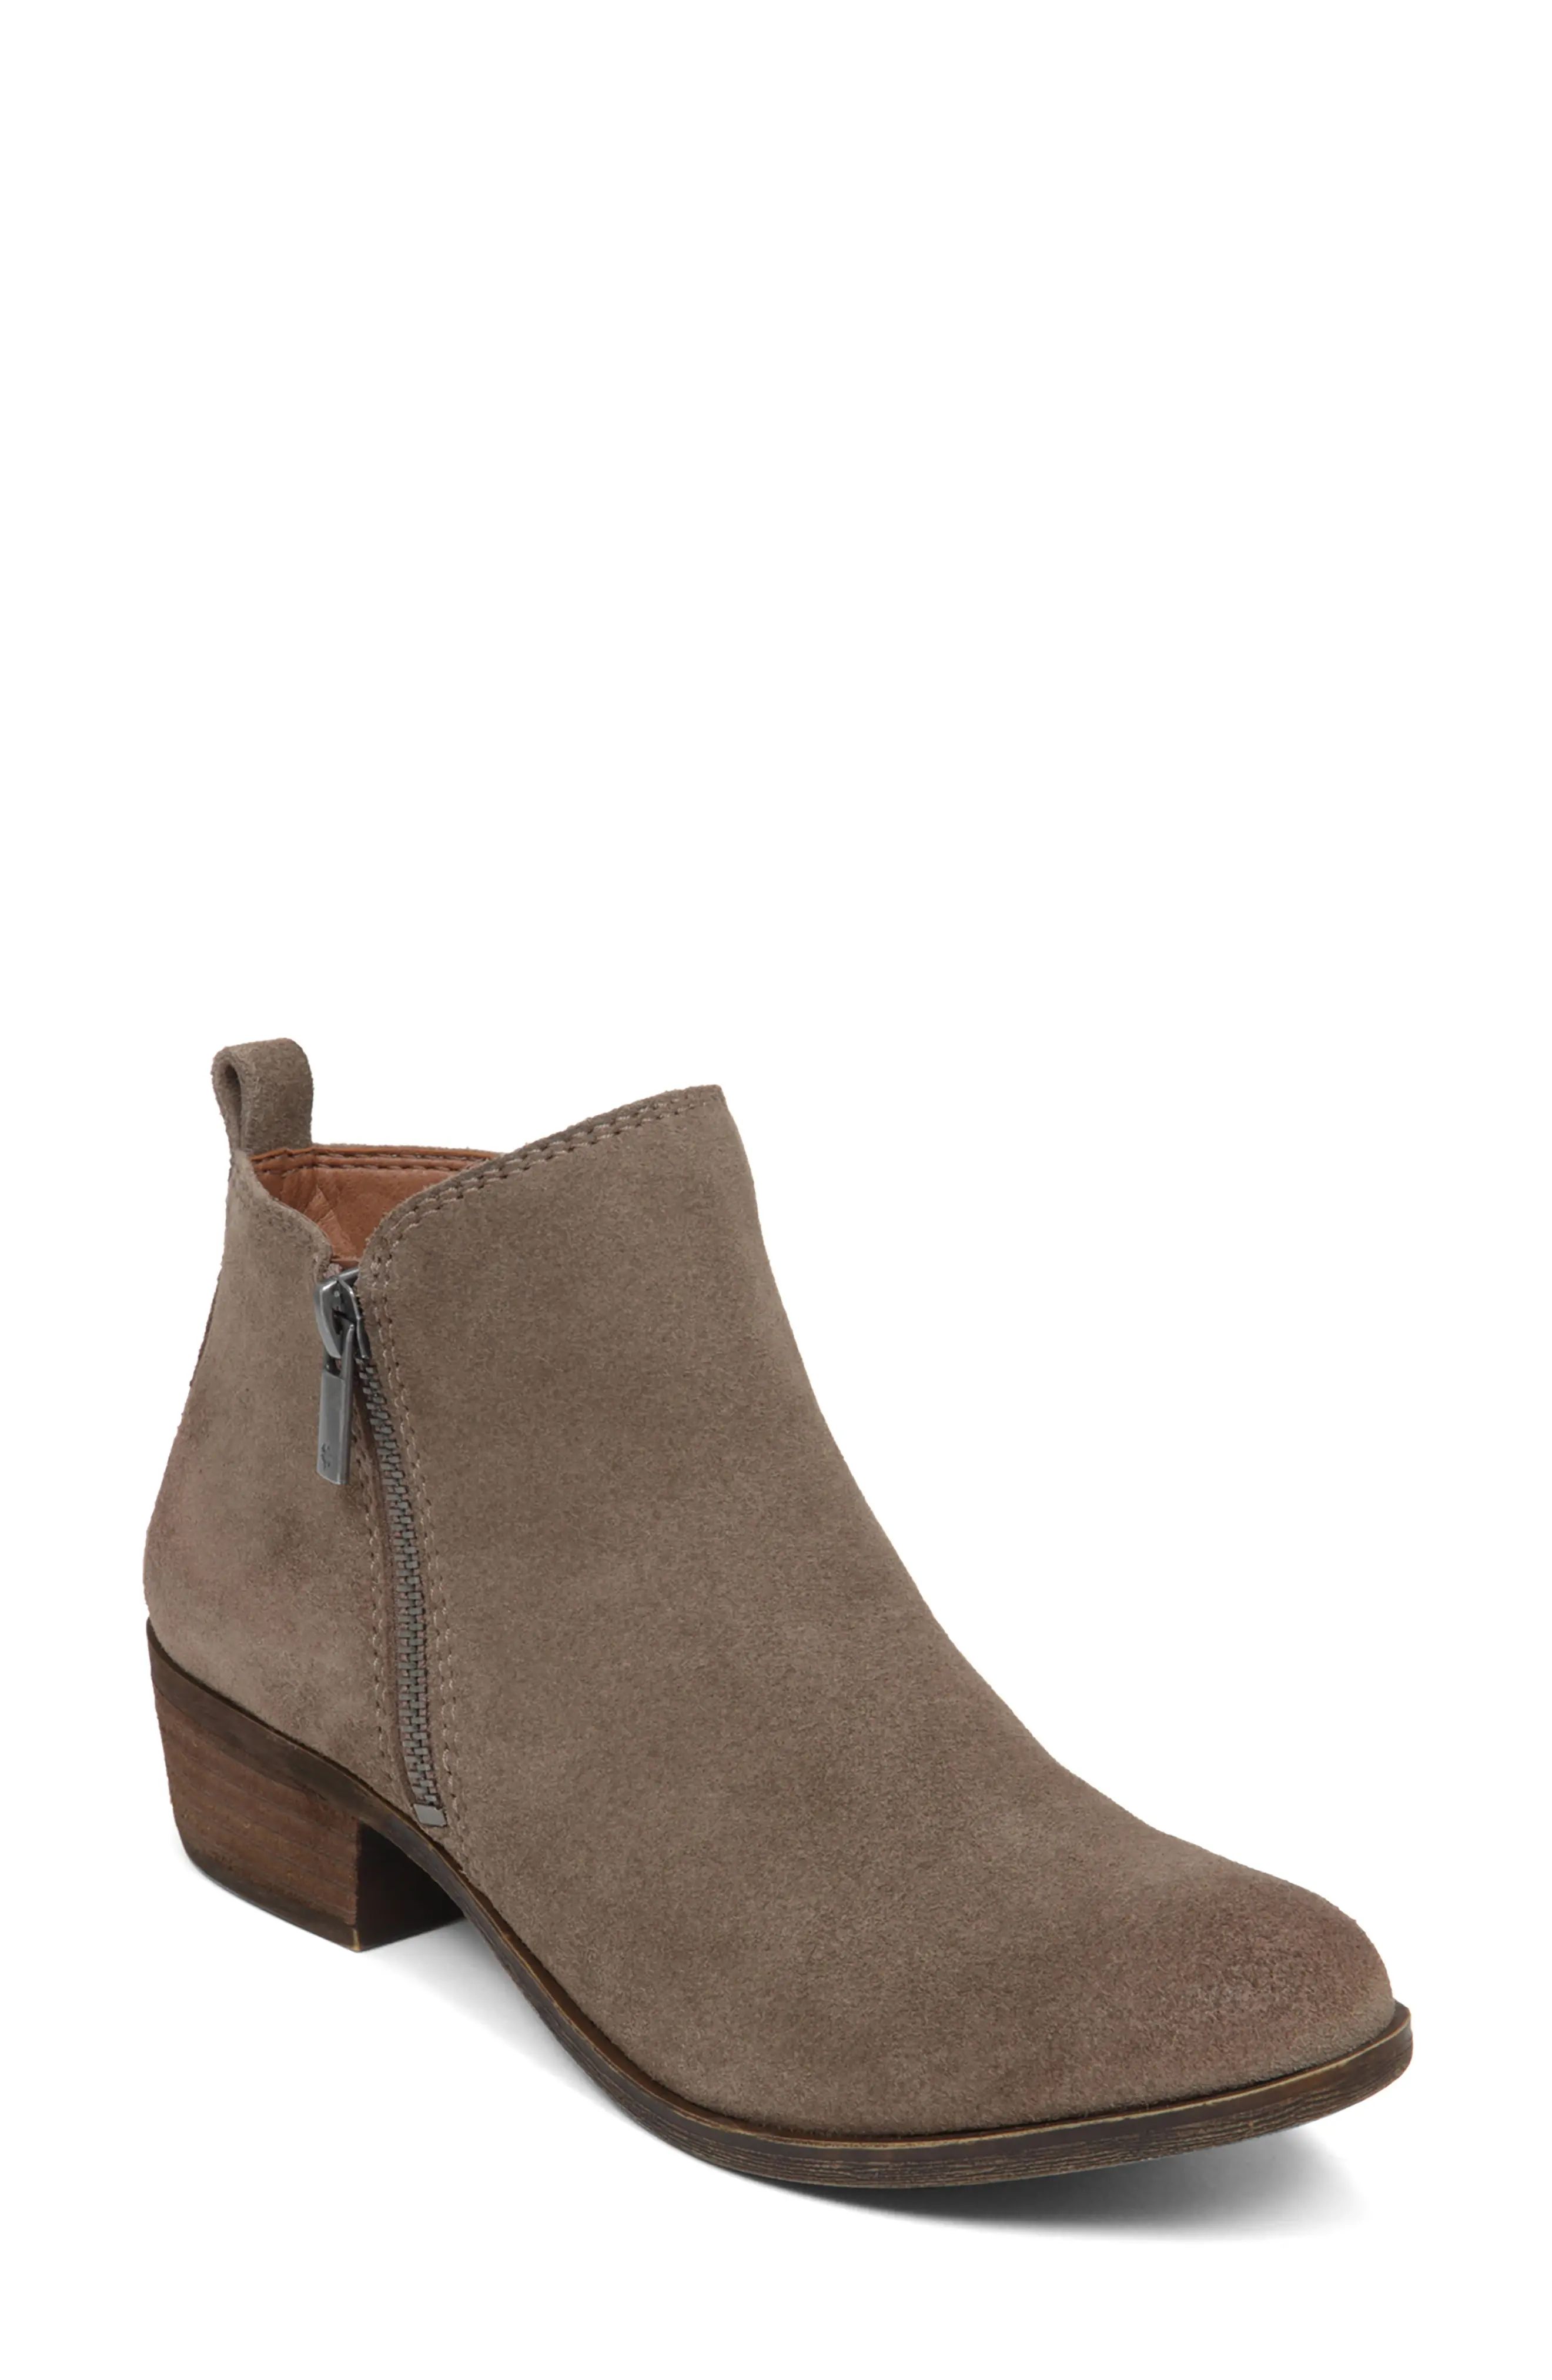 Women's Lucky Brand Basel Bootie, Size 7 M - Brown | Nordstrom